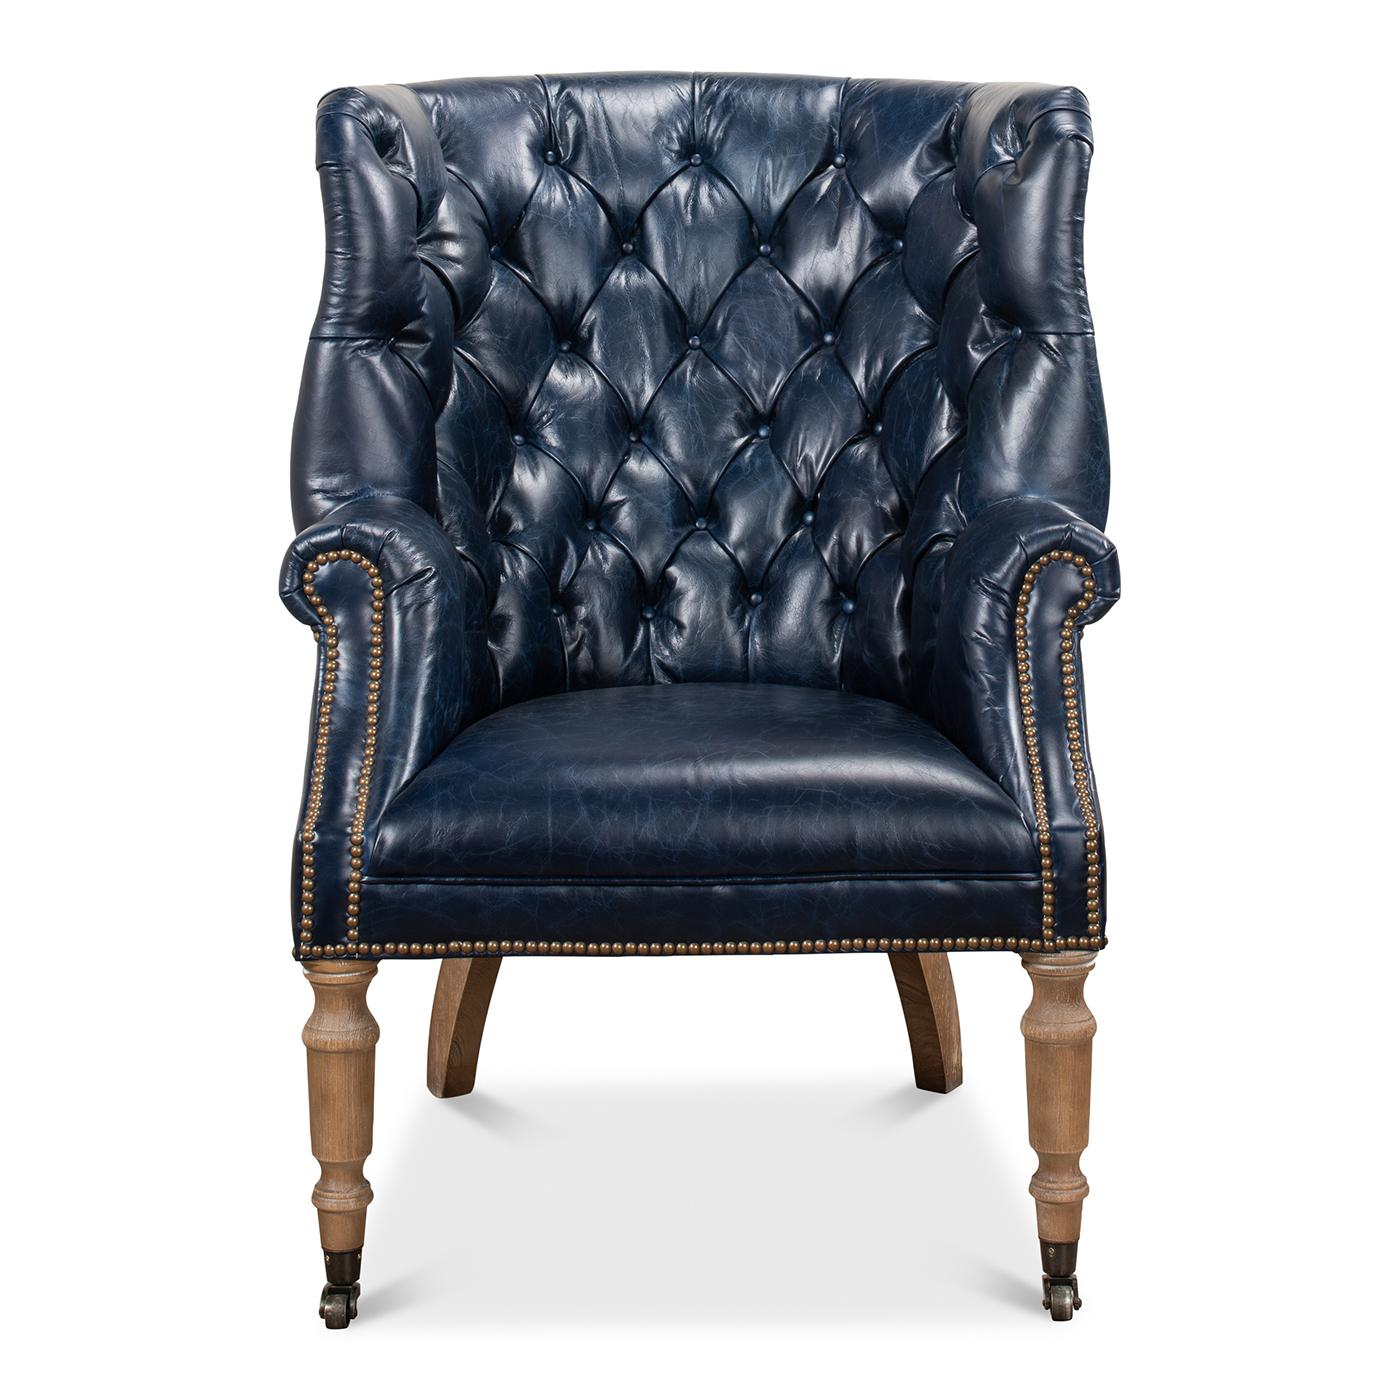 A wonderful George III style barrel back wingchair with top-grain Chateau blue colored leather, a tufted upholstery barrel backrest with winged sides, rolled arms and a padded seat. Finished with brass nailhead trim and raised on cerused turned